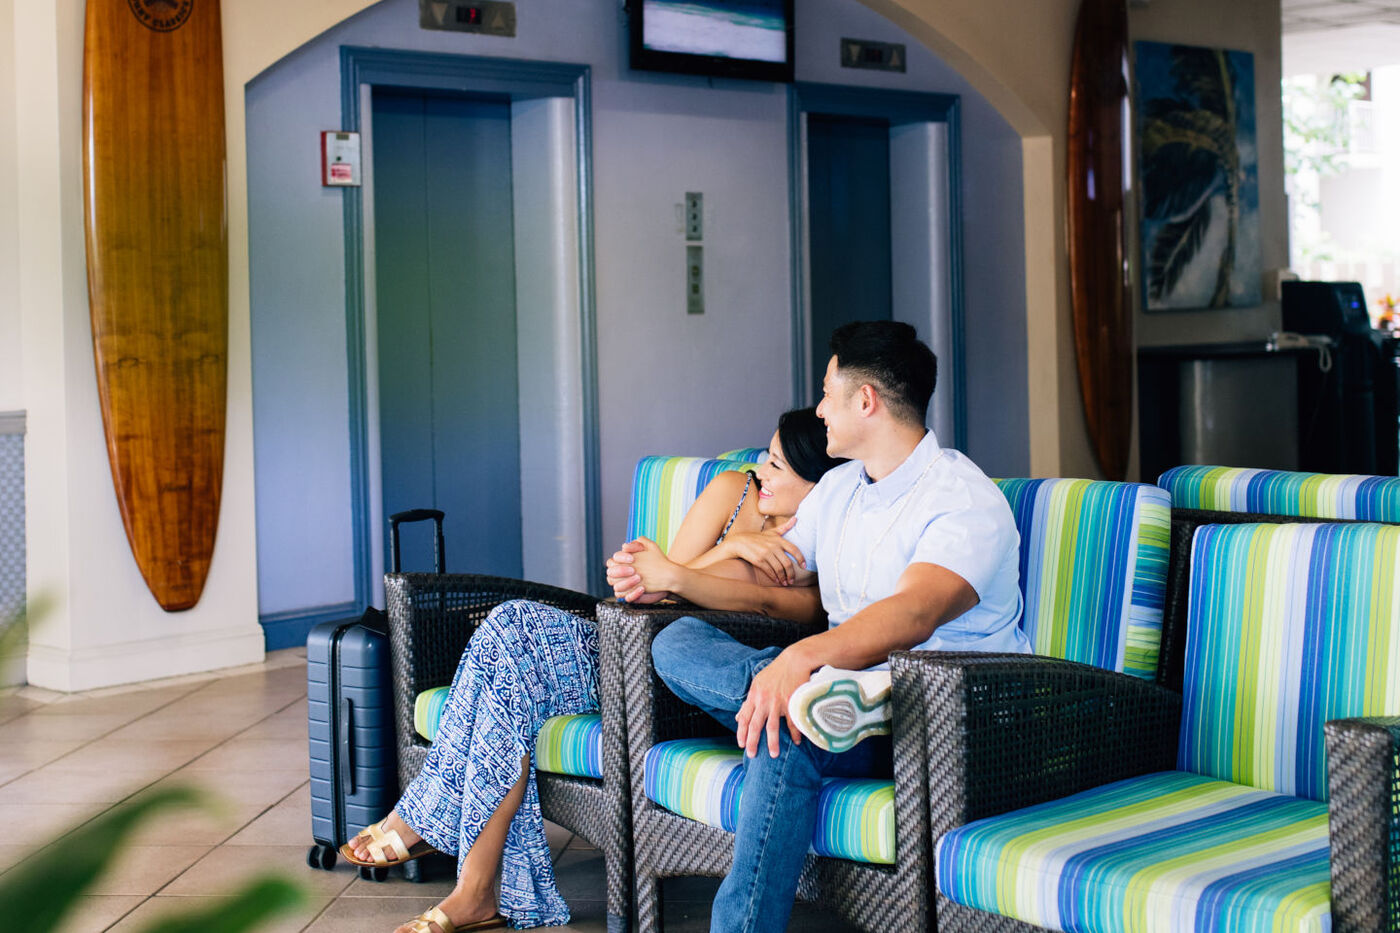 Couple sitting in the lobby area near the iconic surf boards hanging on the wall at the Aqua Aloha Surf Hotel